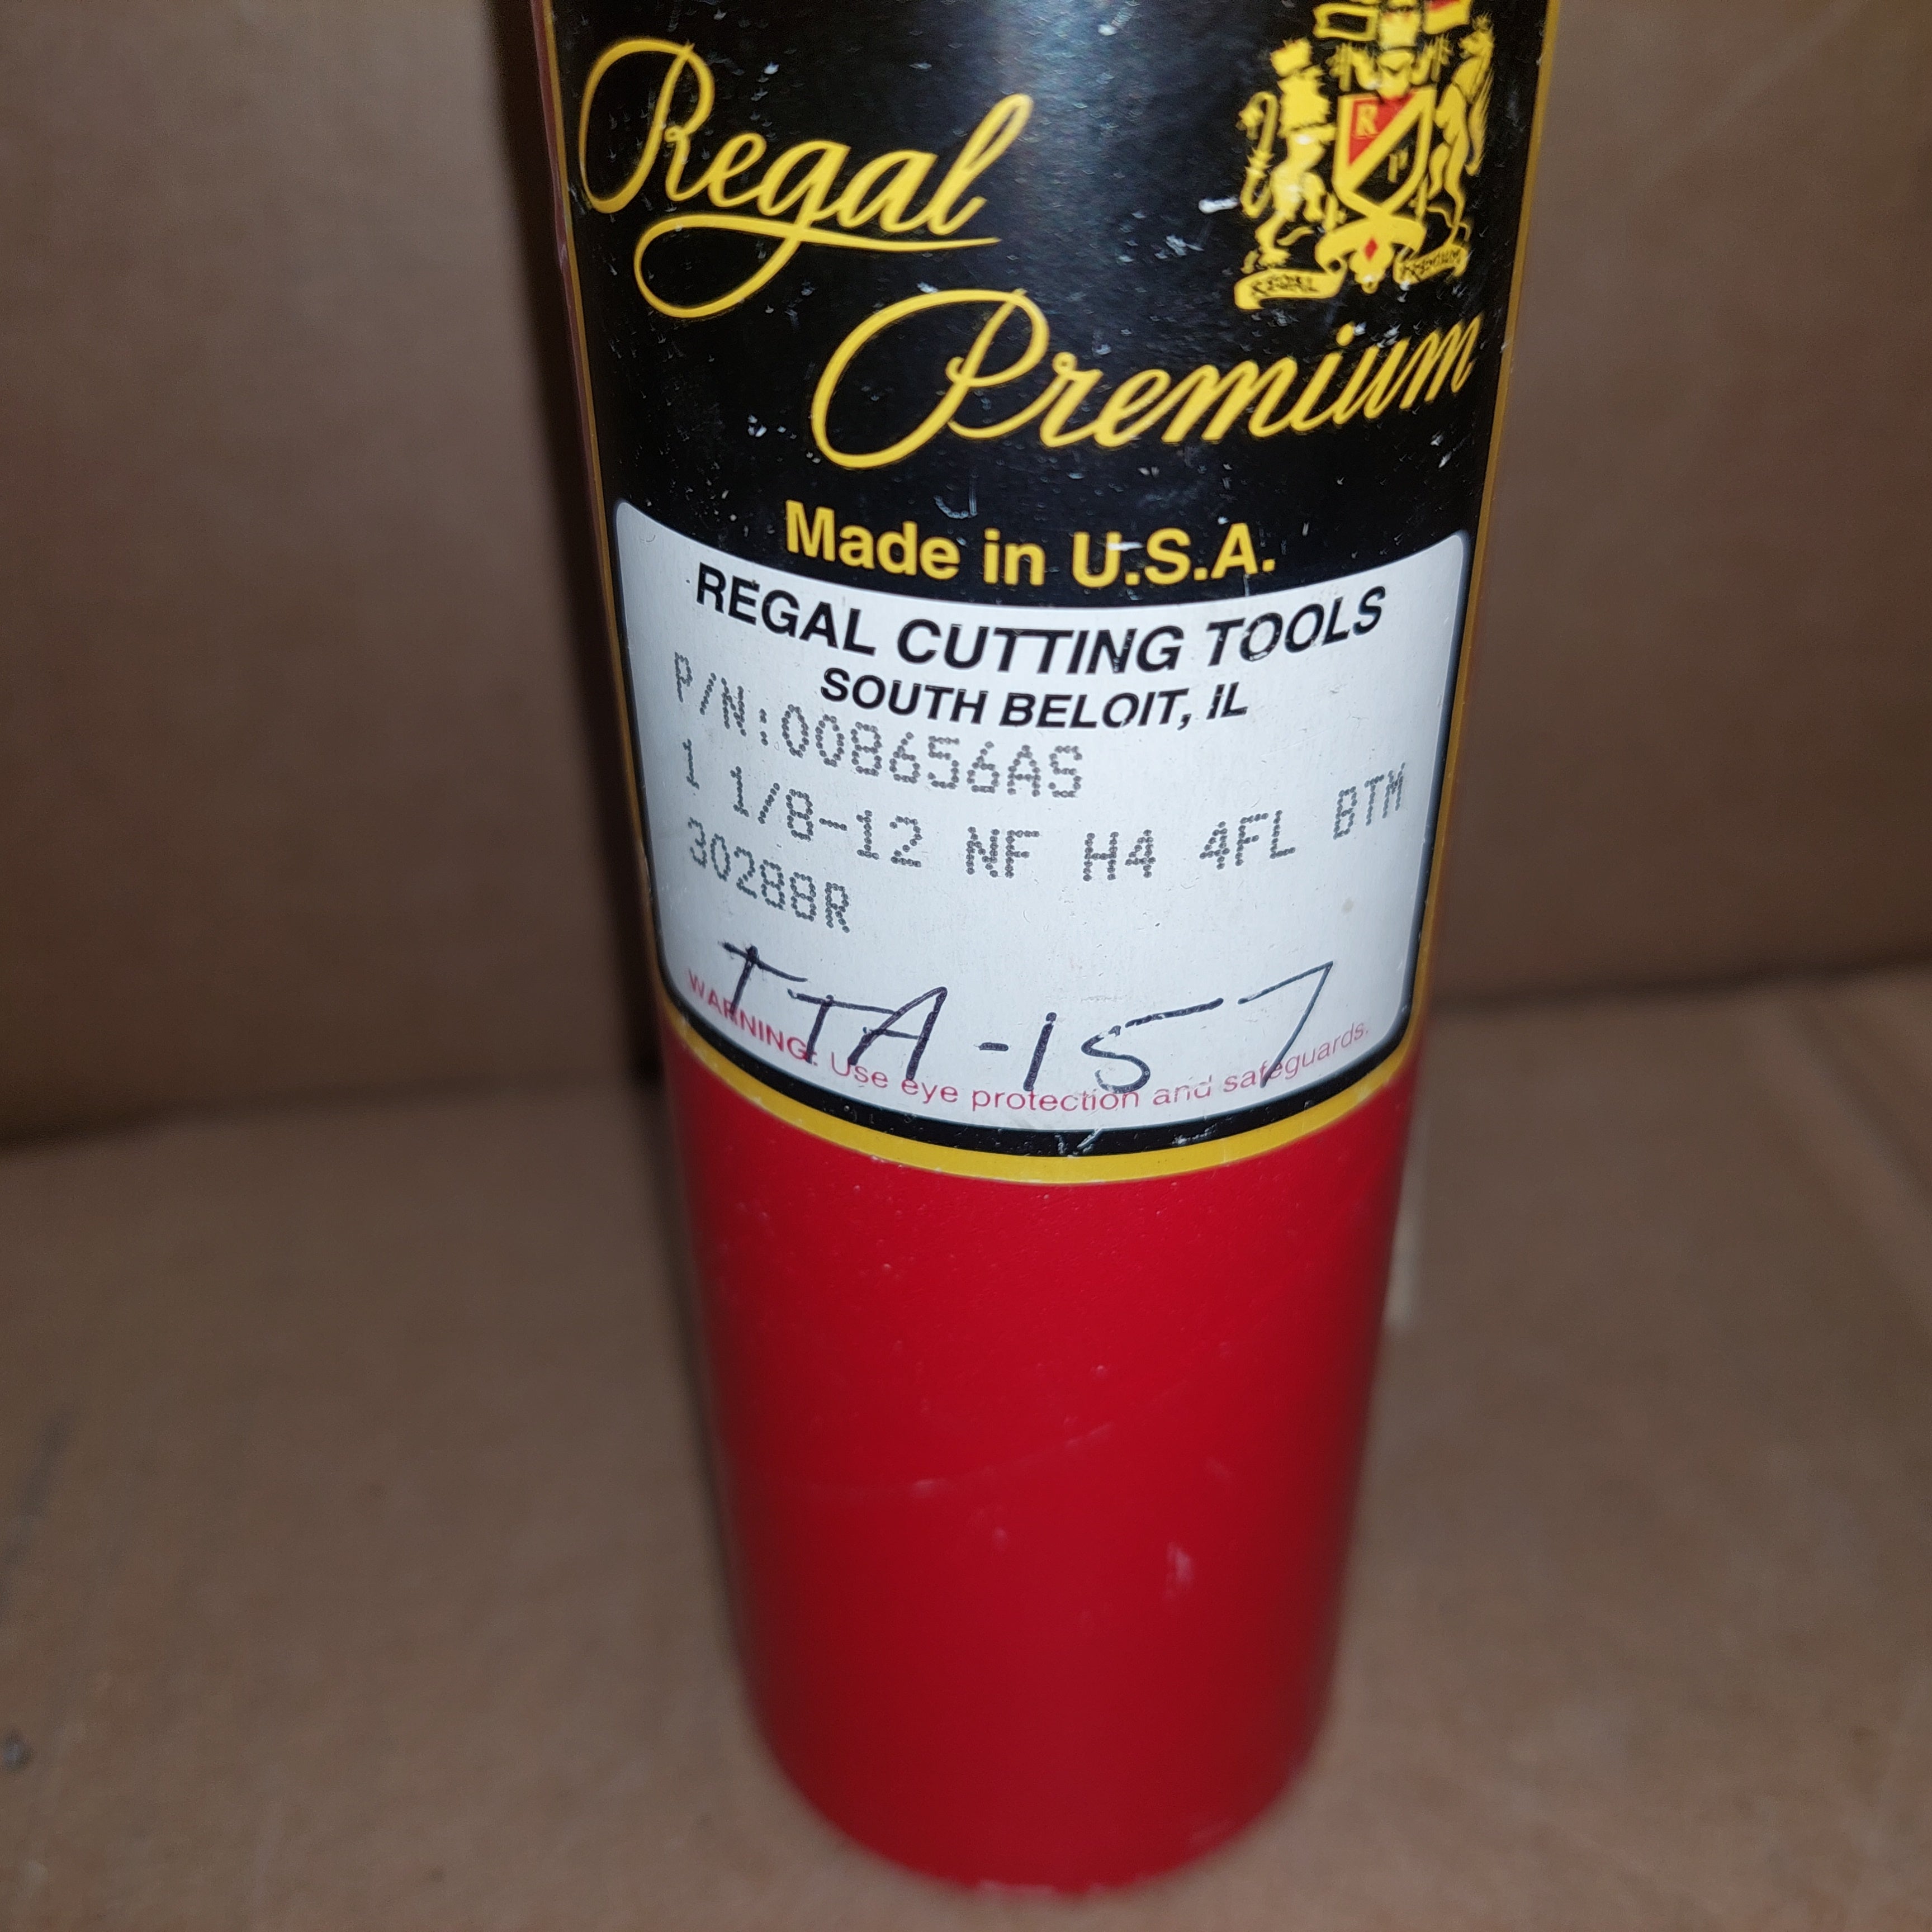 Regal Cutting Tools 008656AS 1 1/8-12, NF H4 4FL BTM Straight Bottoming New